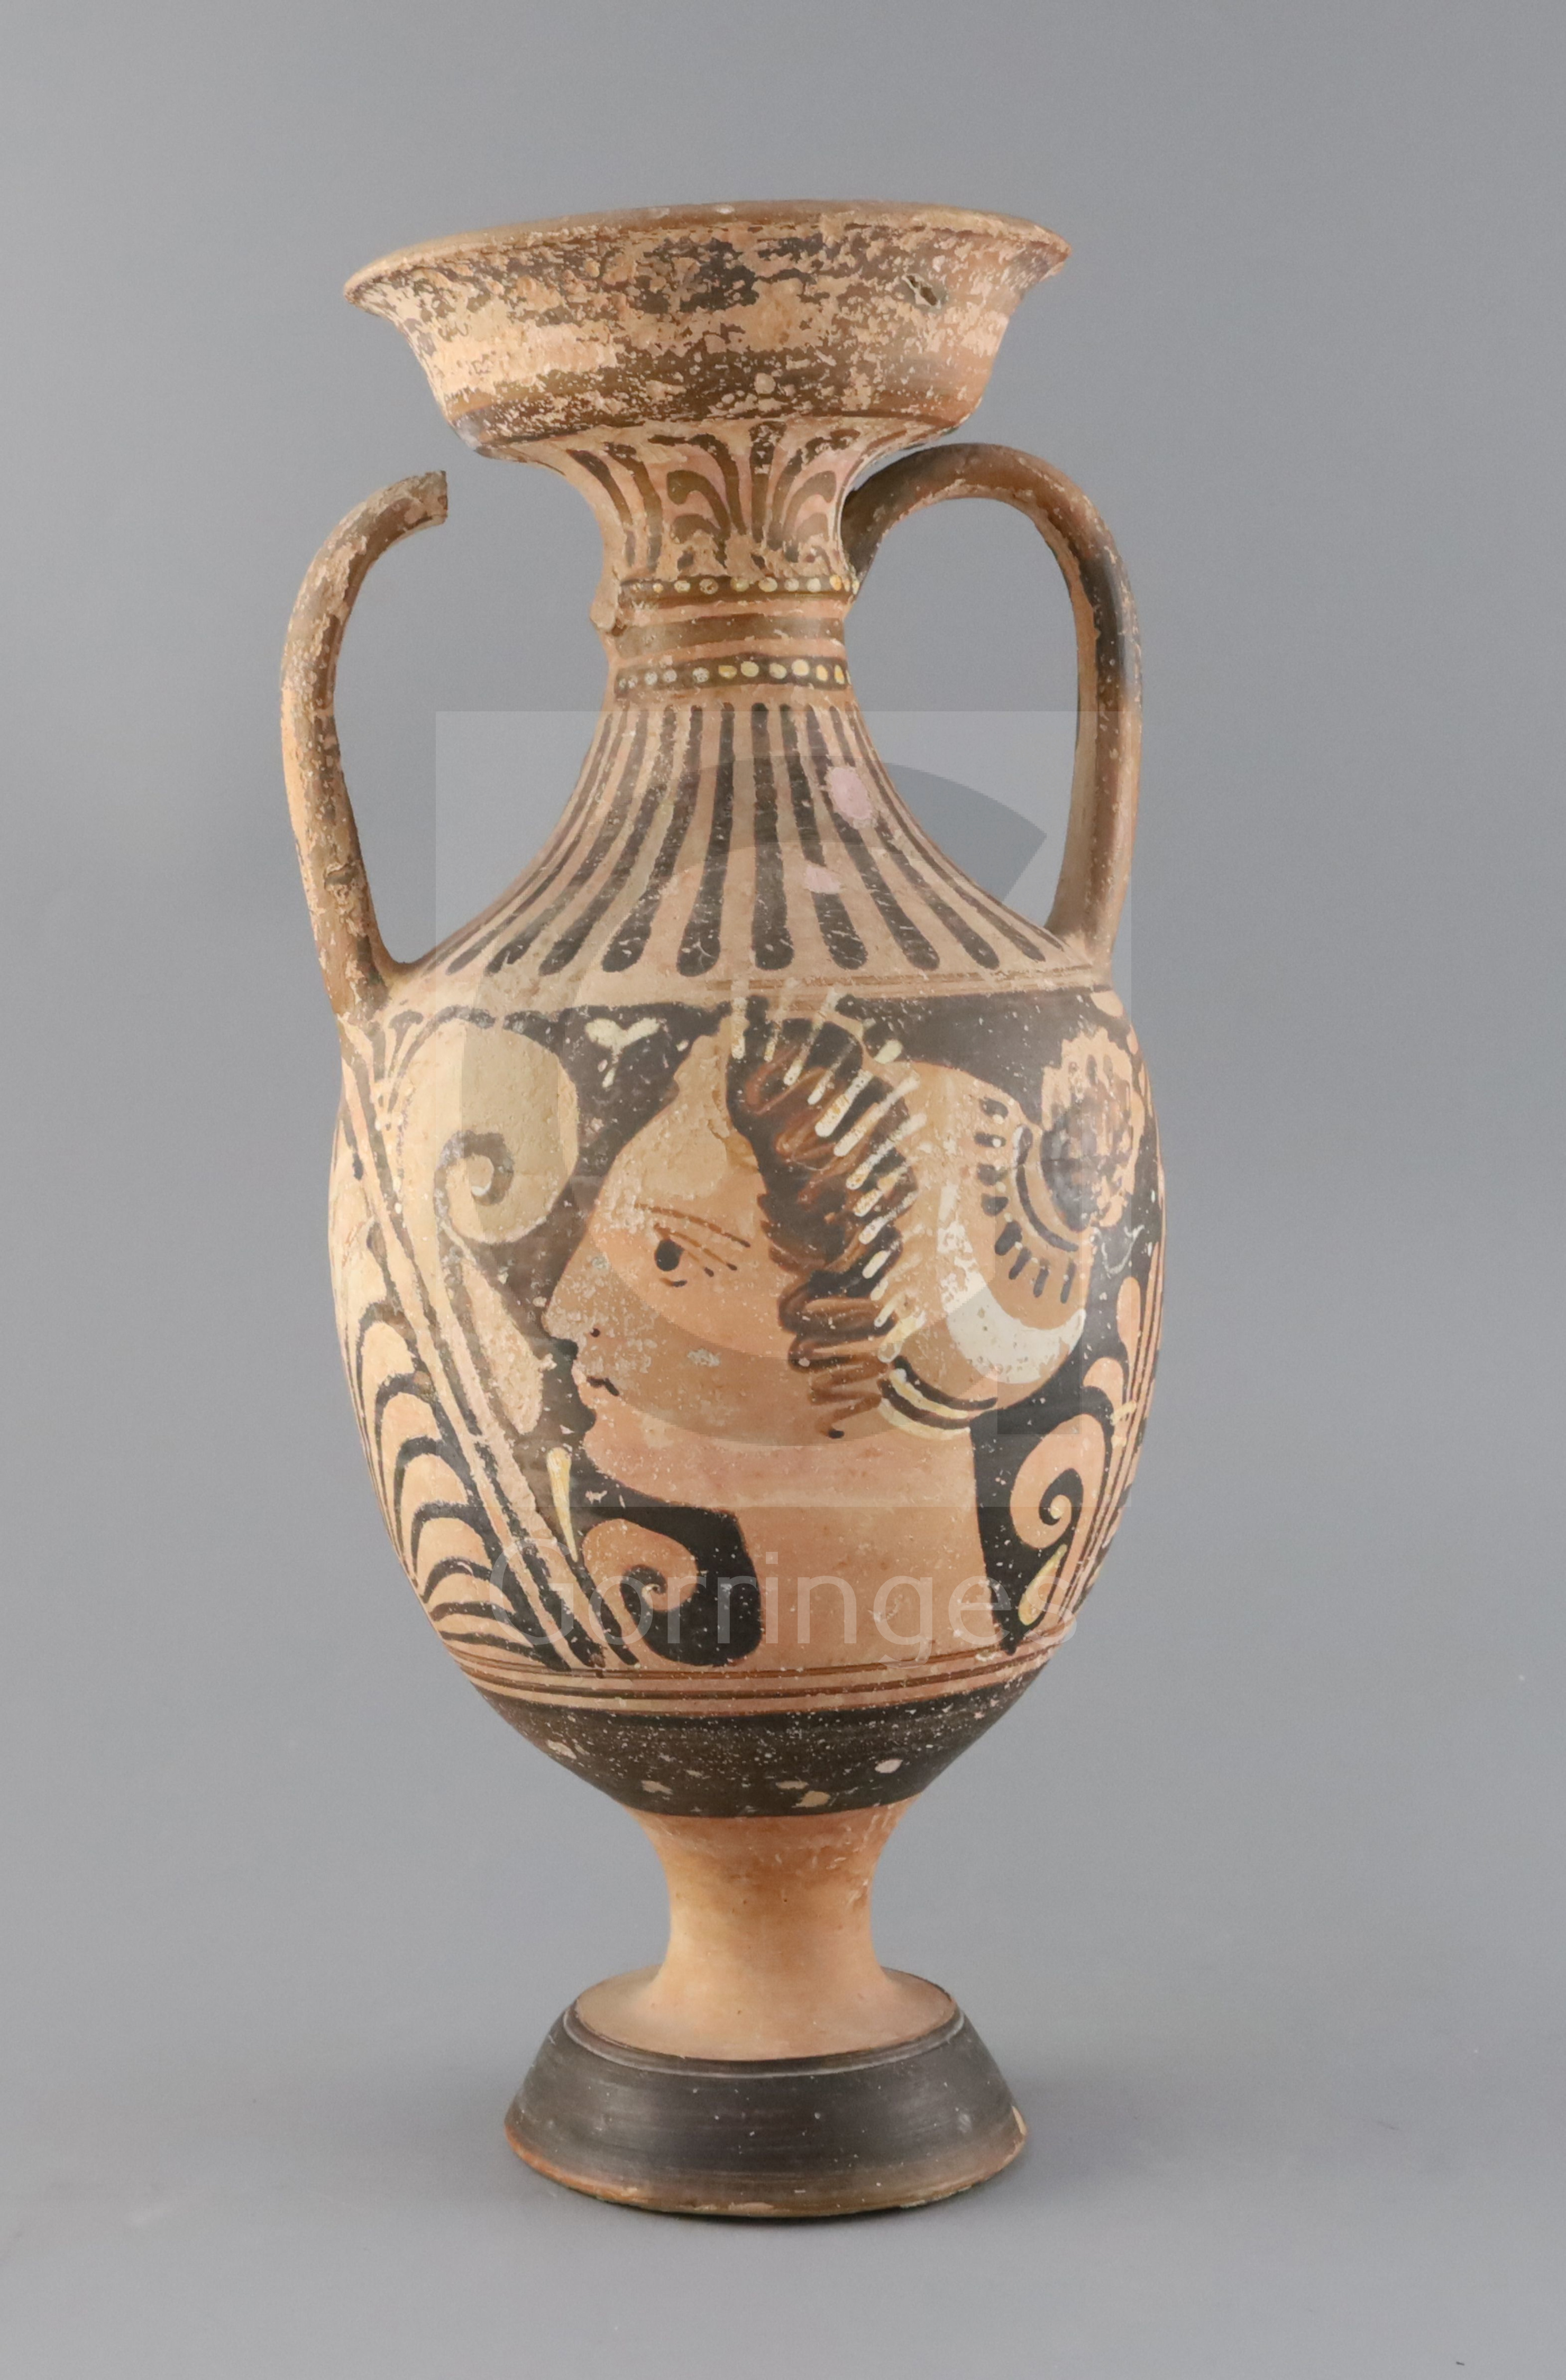 An Apulian red-figure pottery amphora, Southern Italy, 4th century B.C., part of one handle lacking